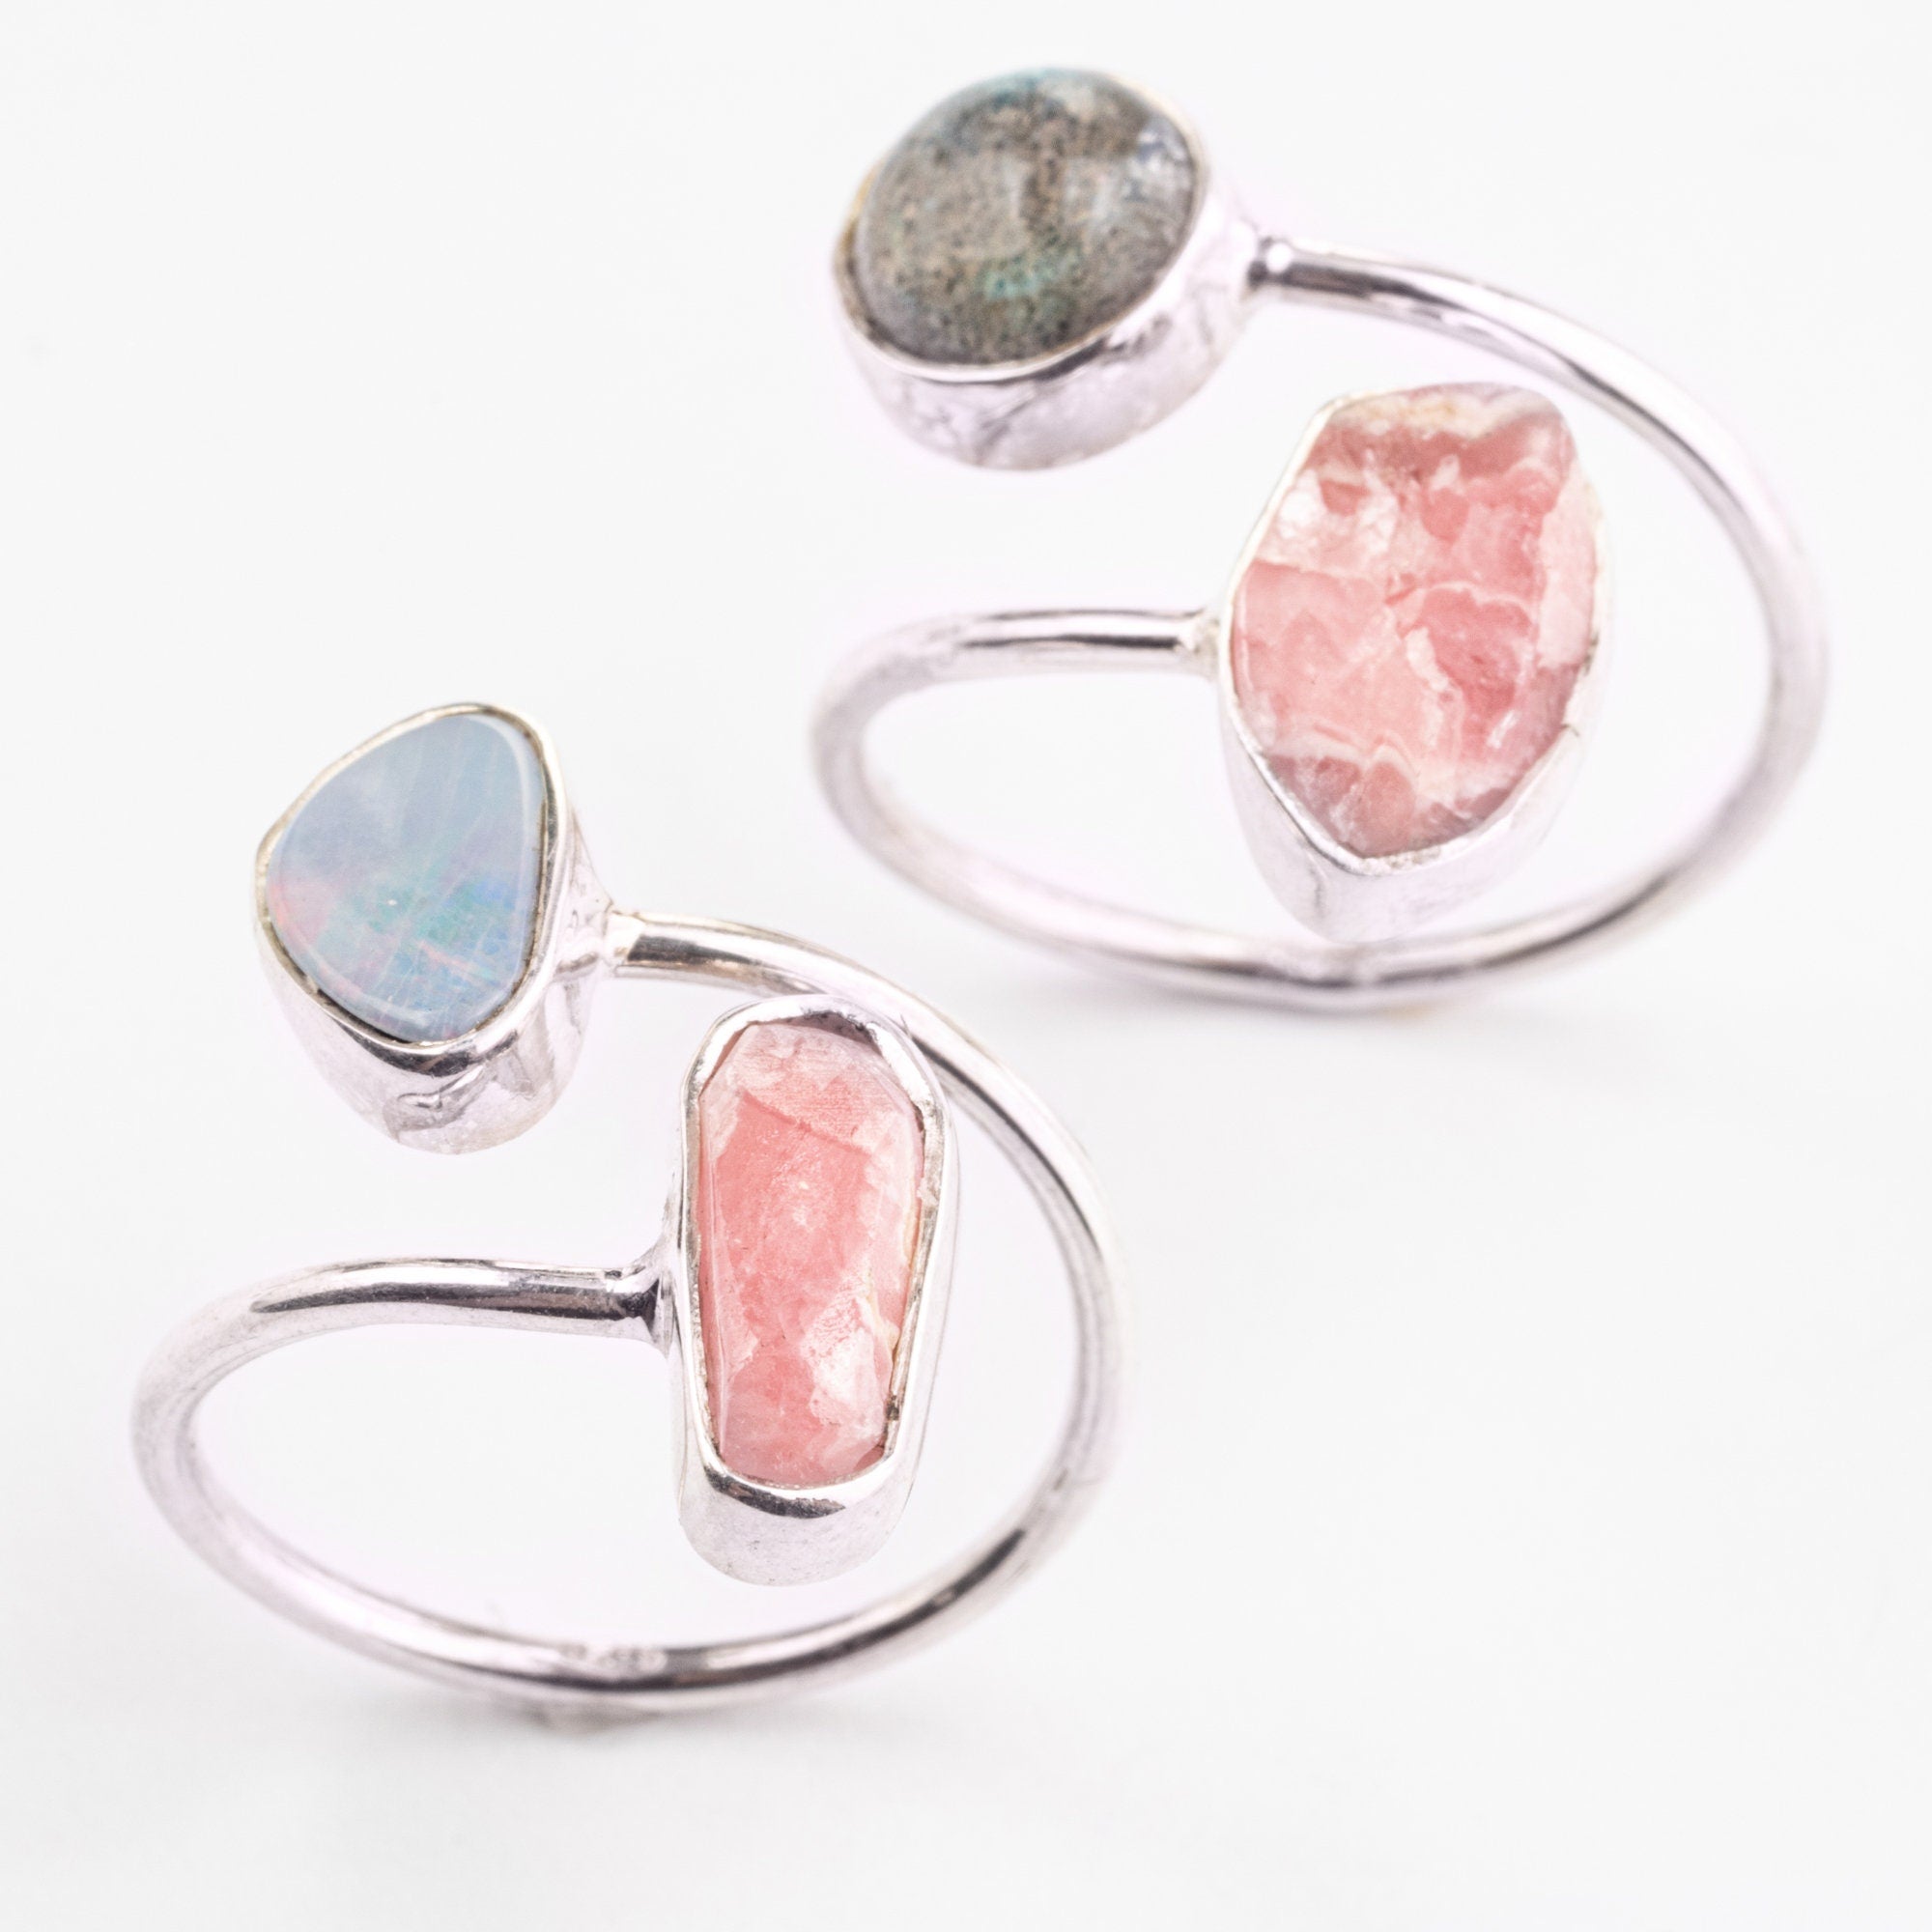 Double Stone - Labradorite & Rhodochrosite - Open Adjustable Selection - 925 Sterling Silver Ring